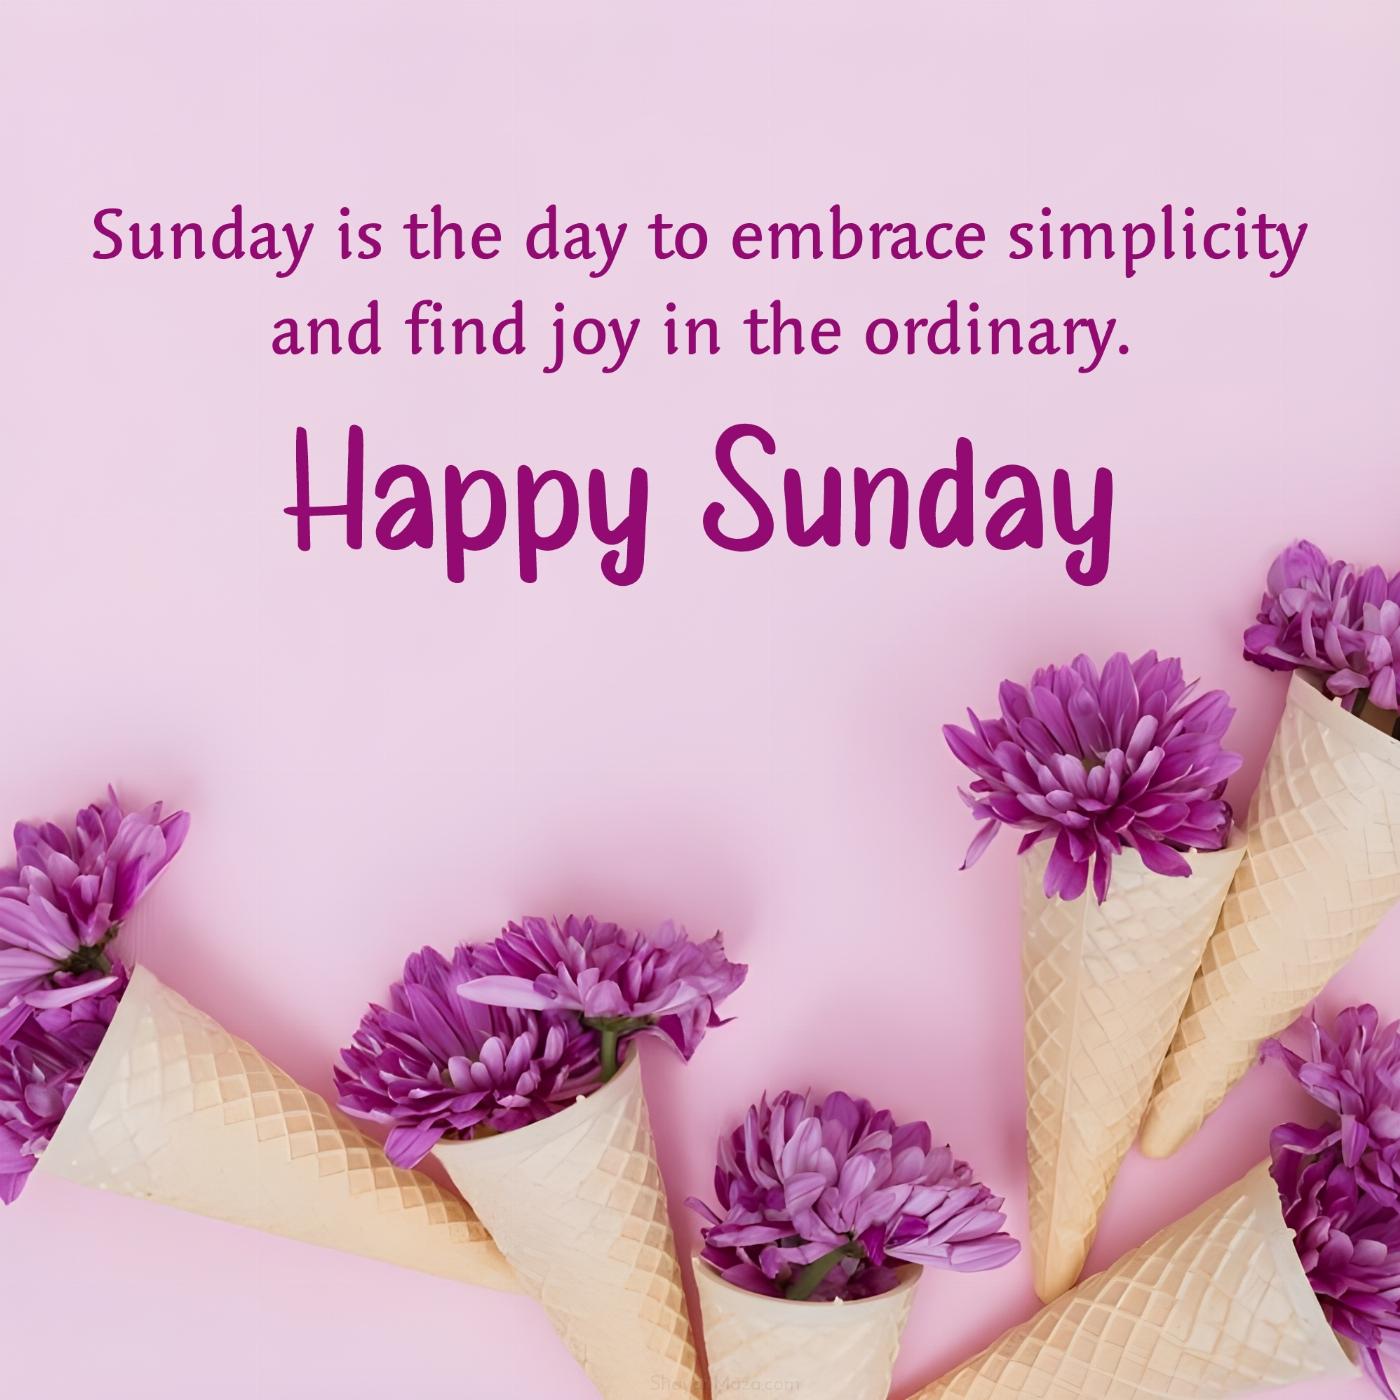 Sunday is the day to embrace simplicity and find joy